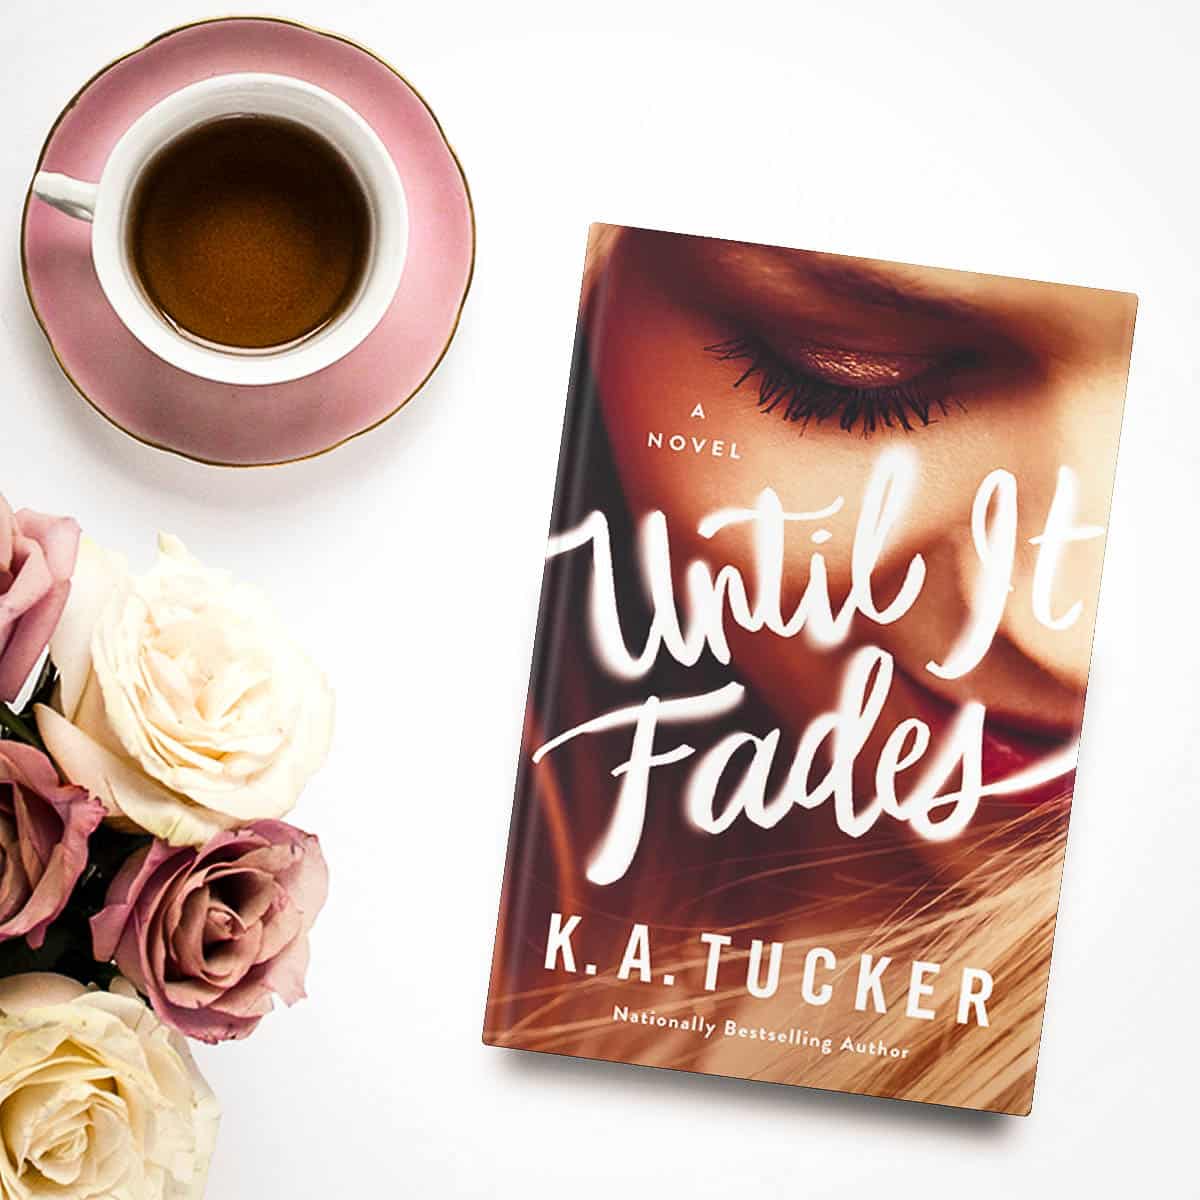 Until It Fades by KA Tucker is a sweet, romantic, small-town romance between a young single mom and a famous hockey player that reads like a modern fairytale.